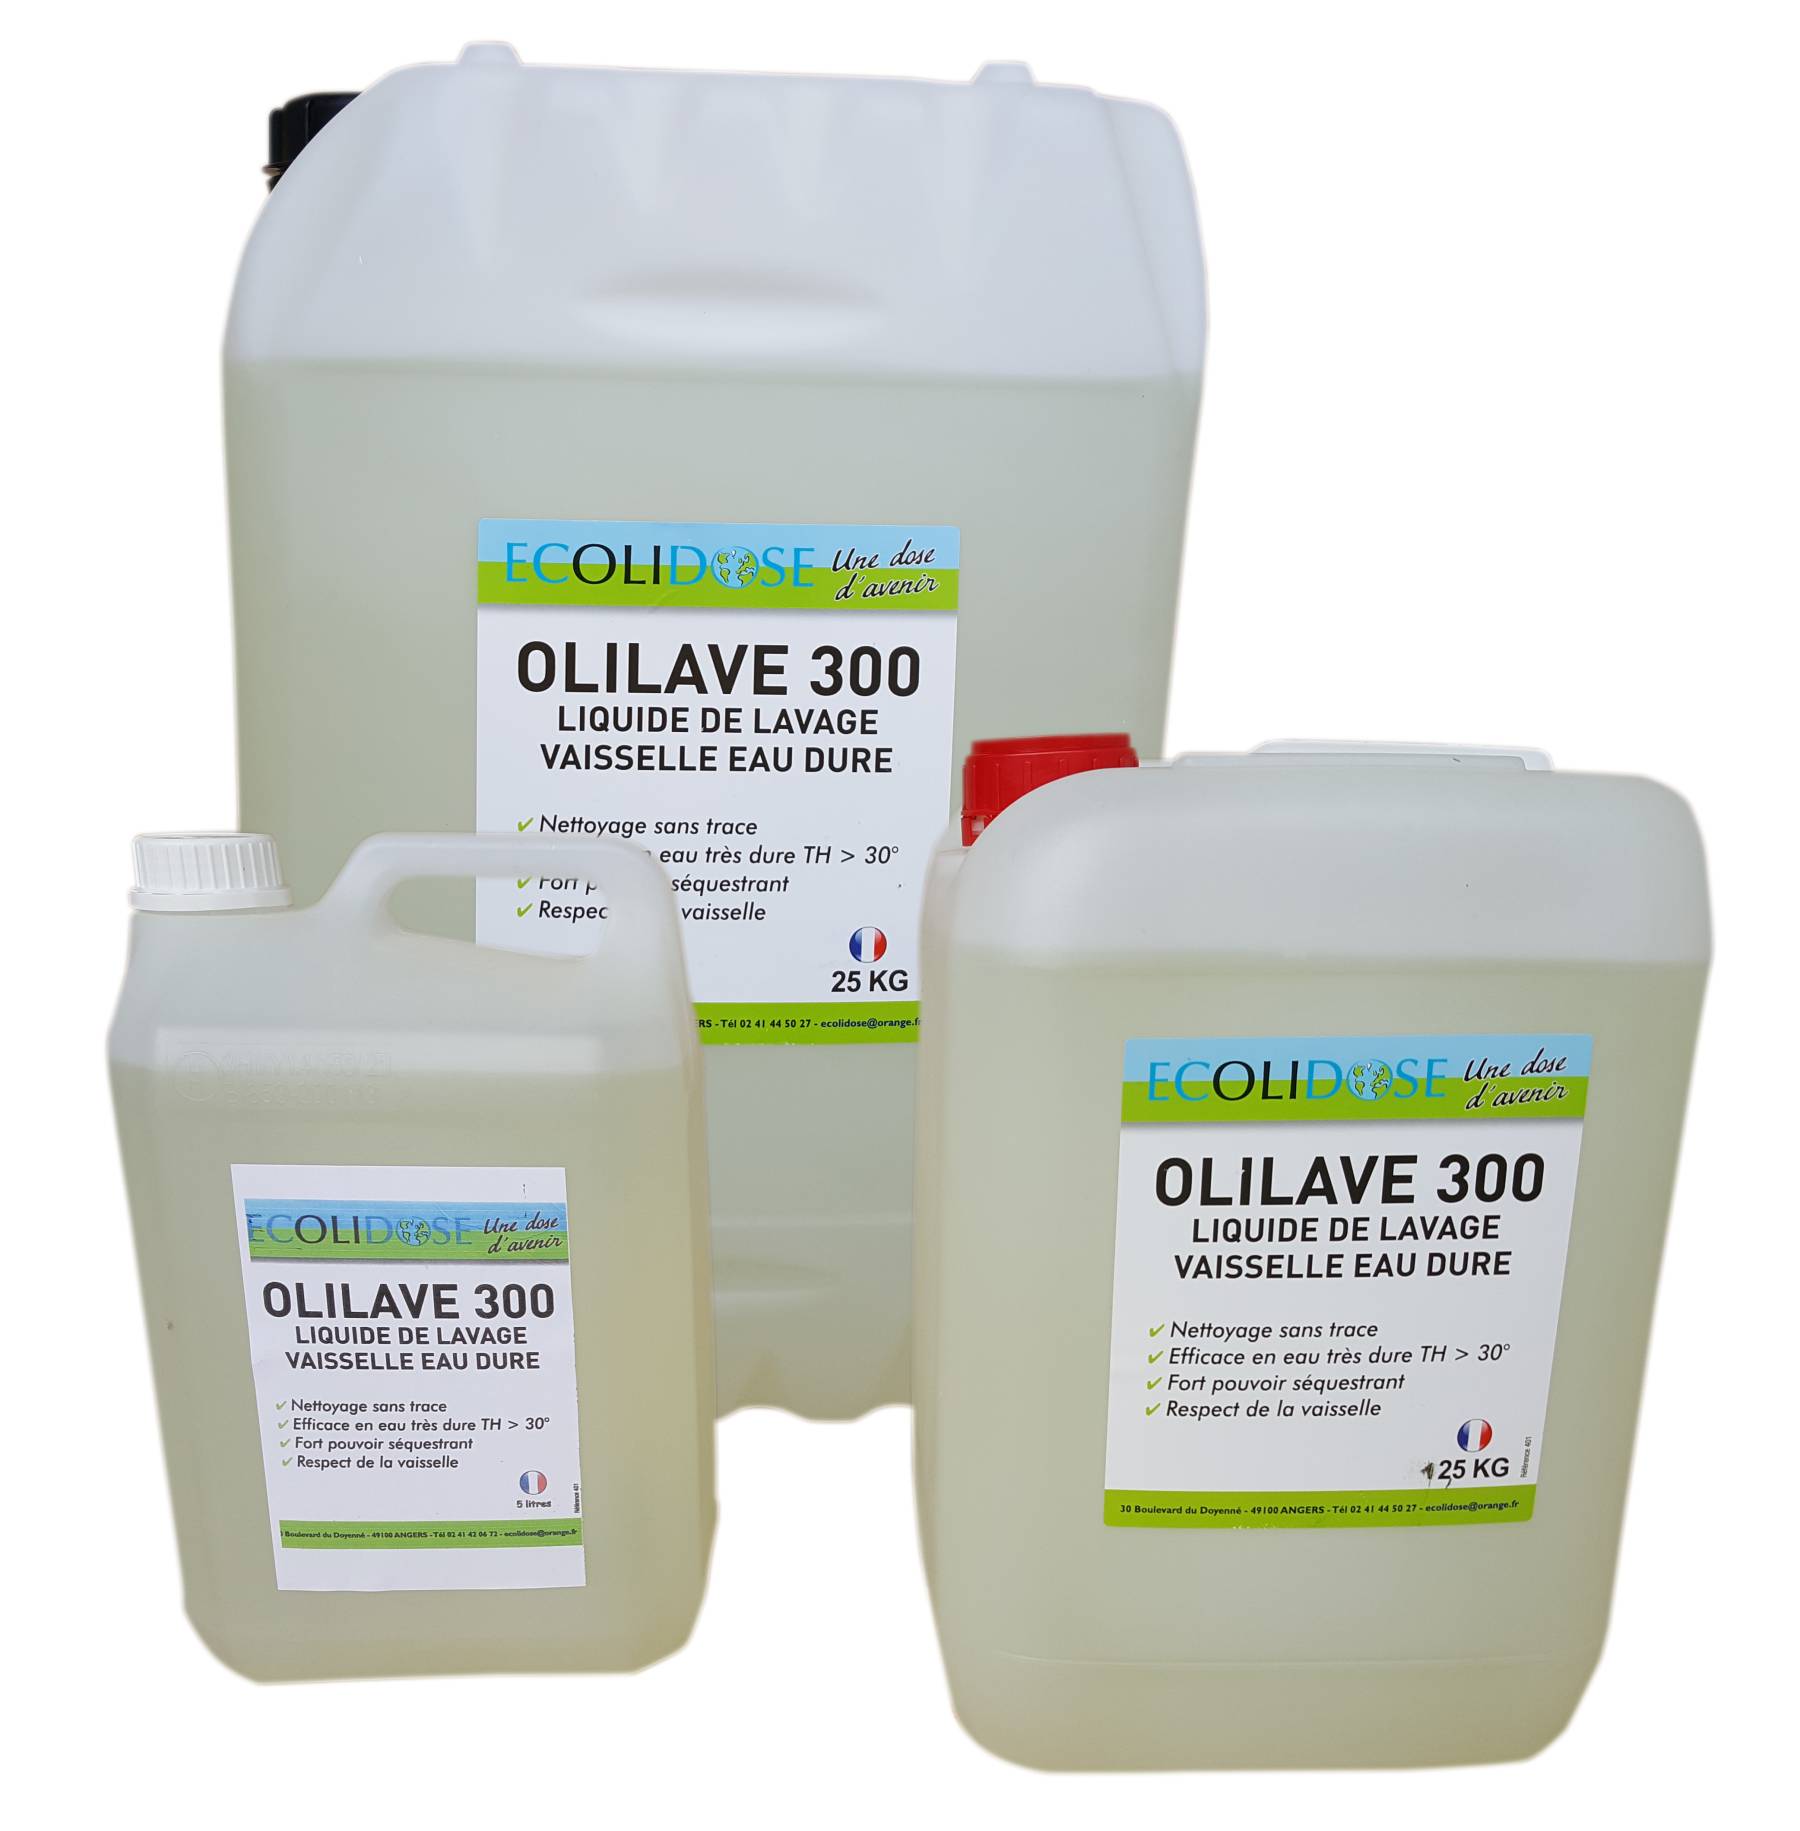 Olilave 300